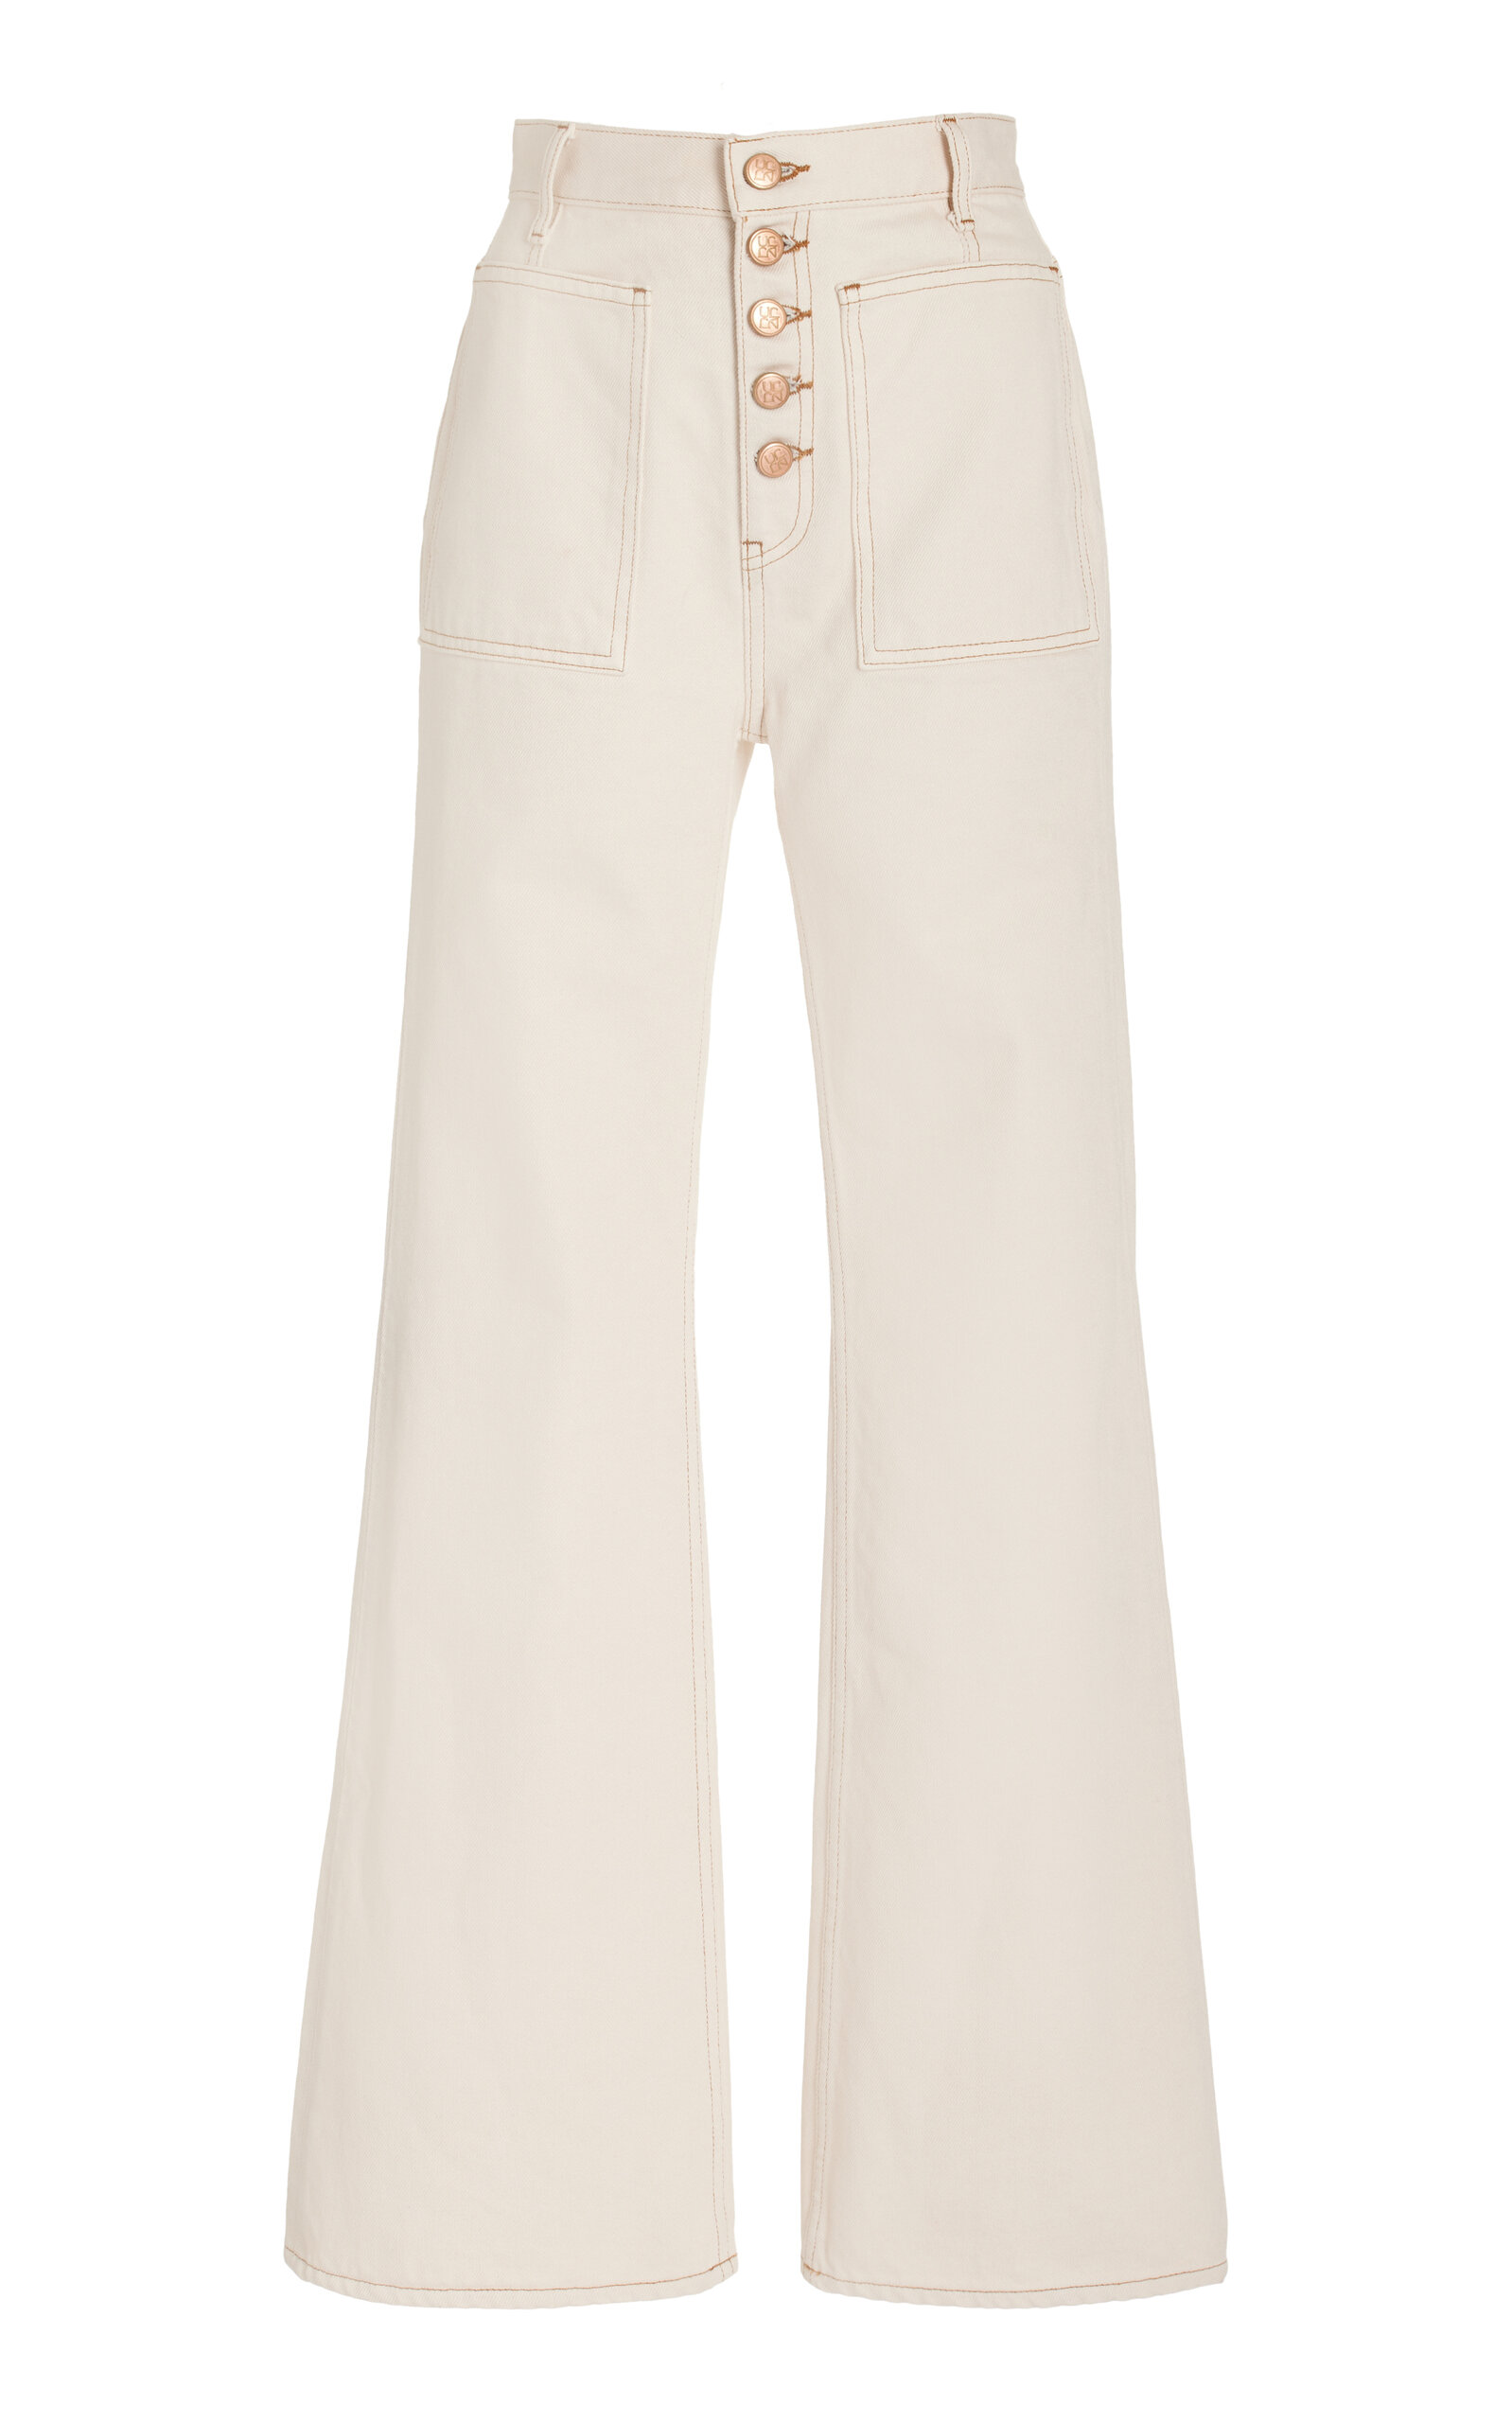 ULLA JOHNSON LOU BUTTON FLY HIGH-WAISTED FLARED JEANS